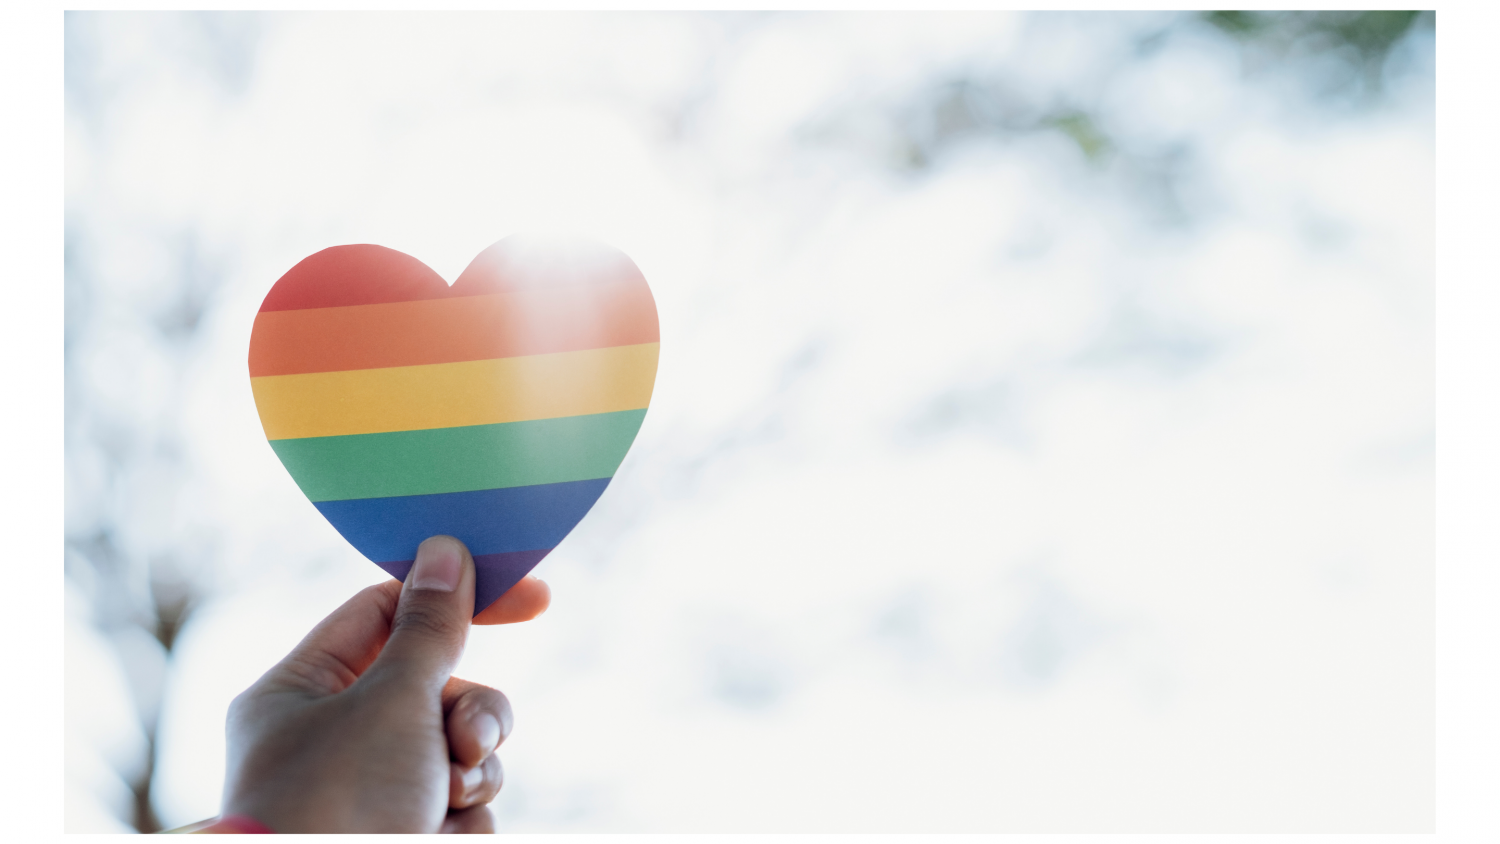 Find out more about the LGBTQ+ resources available